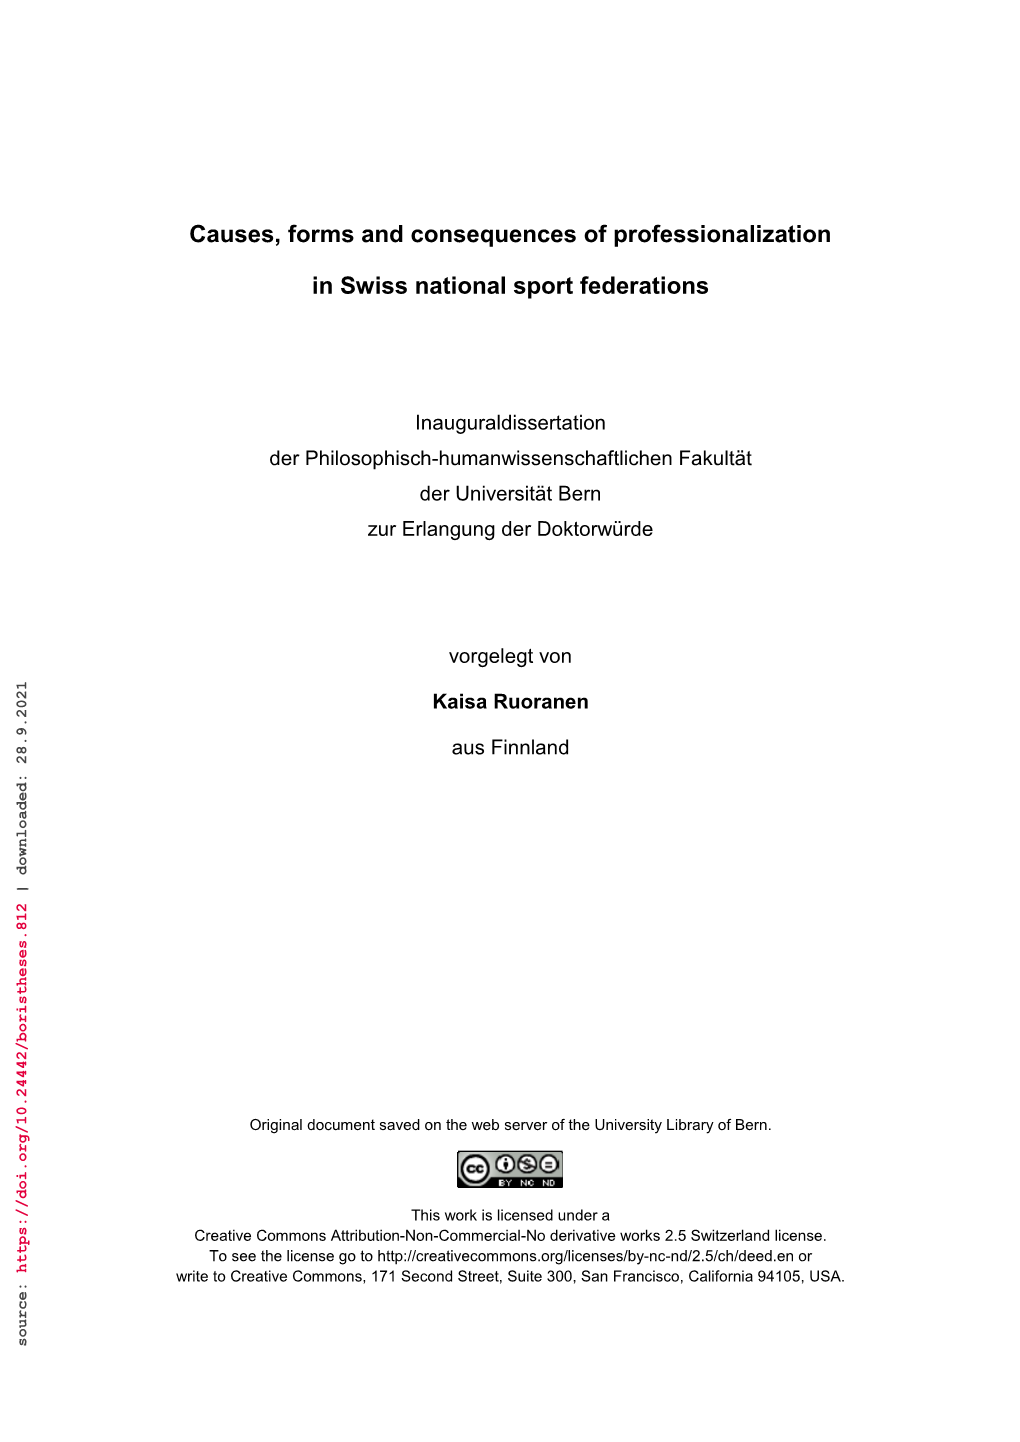 Causes, Forms and Consequences of Professionalization in Swiss